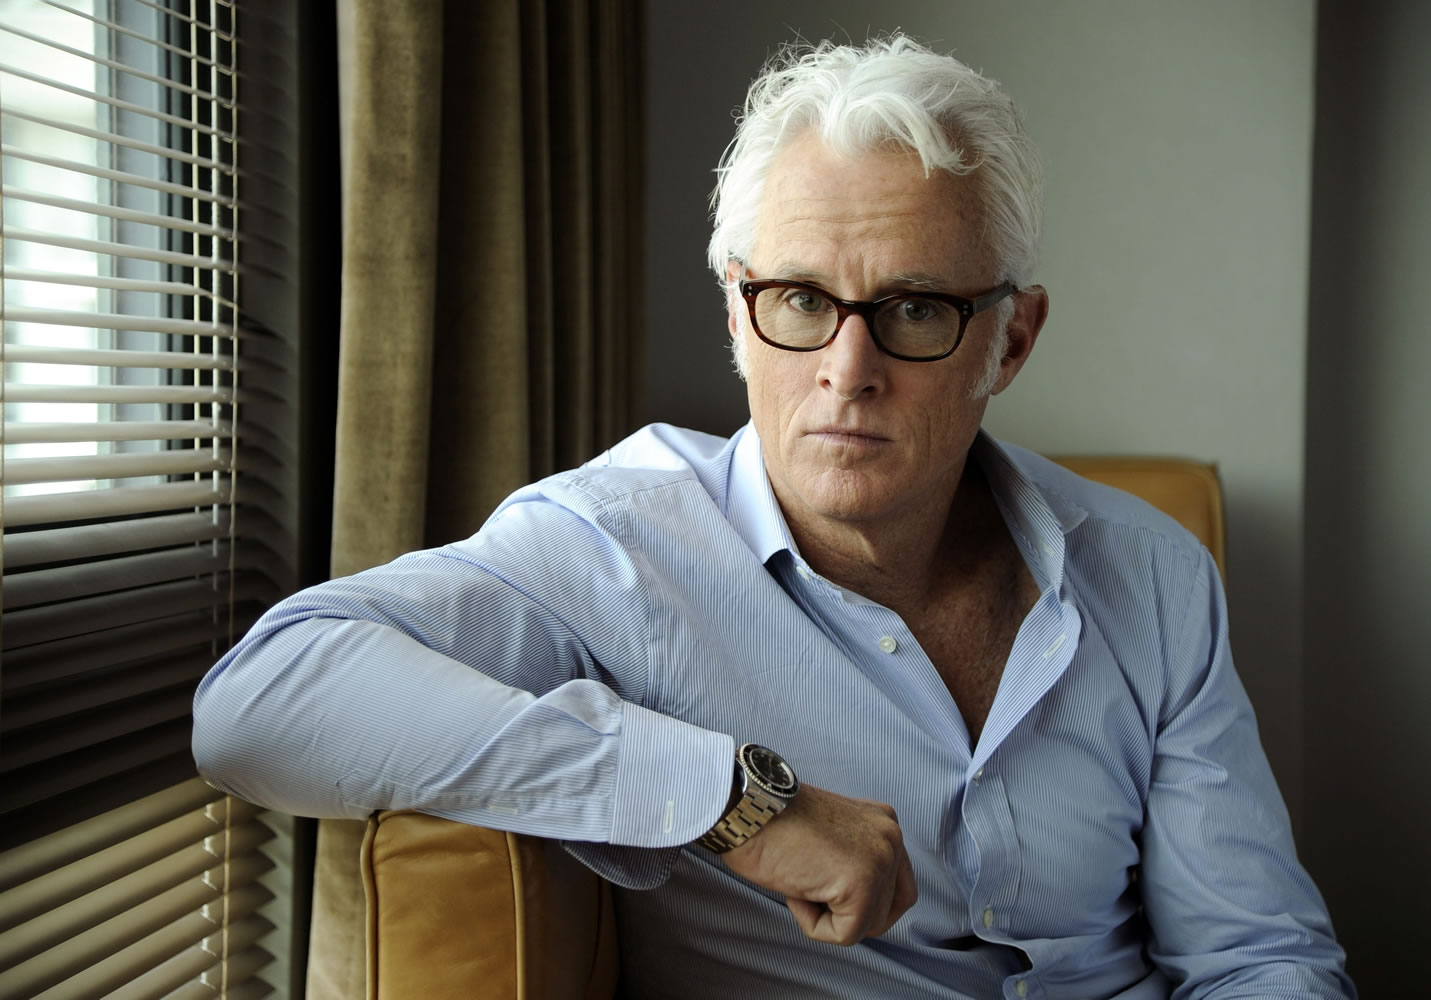 Actor/director John Slattery poses for a portrait on Thursday, May 1, 2014 in Los Angeles. The &quot;Mad Men&quot; actor Slattery makes his directorial debut with &quot;God's Pocket,&quot; a independent film based on Peter Dexter's novel about overlapping working class lives, releasing in theaters May 9.